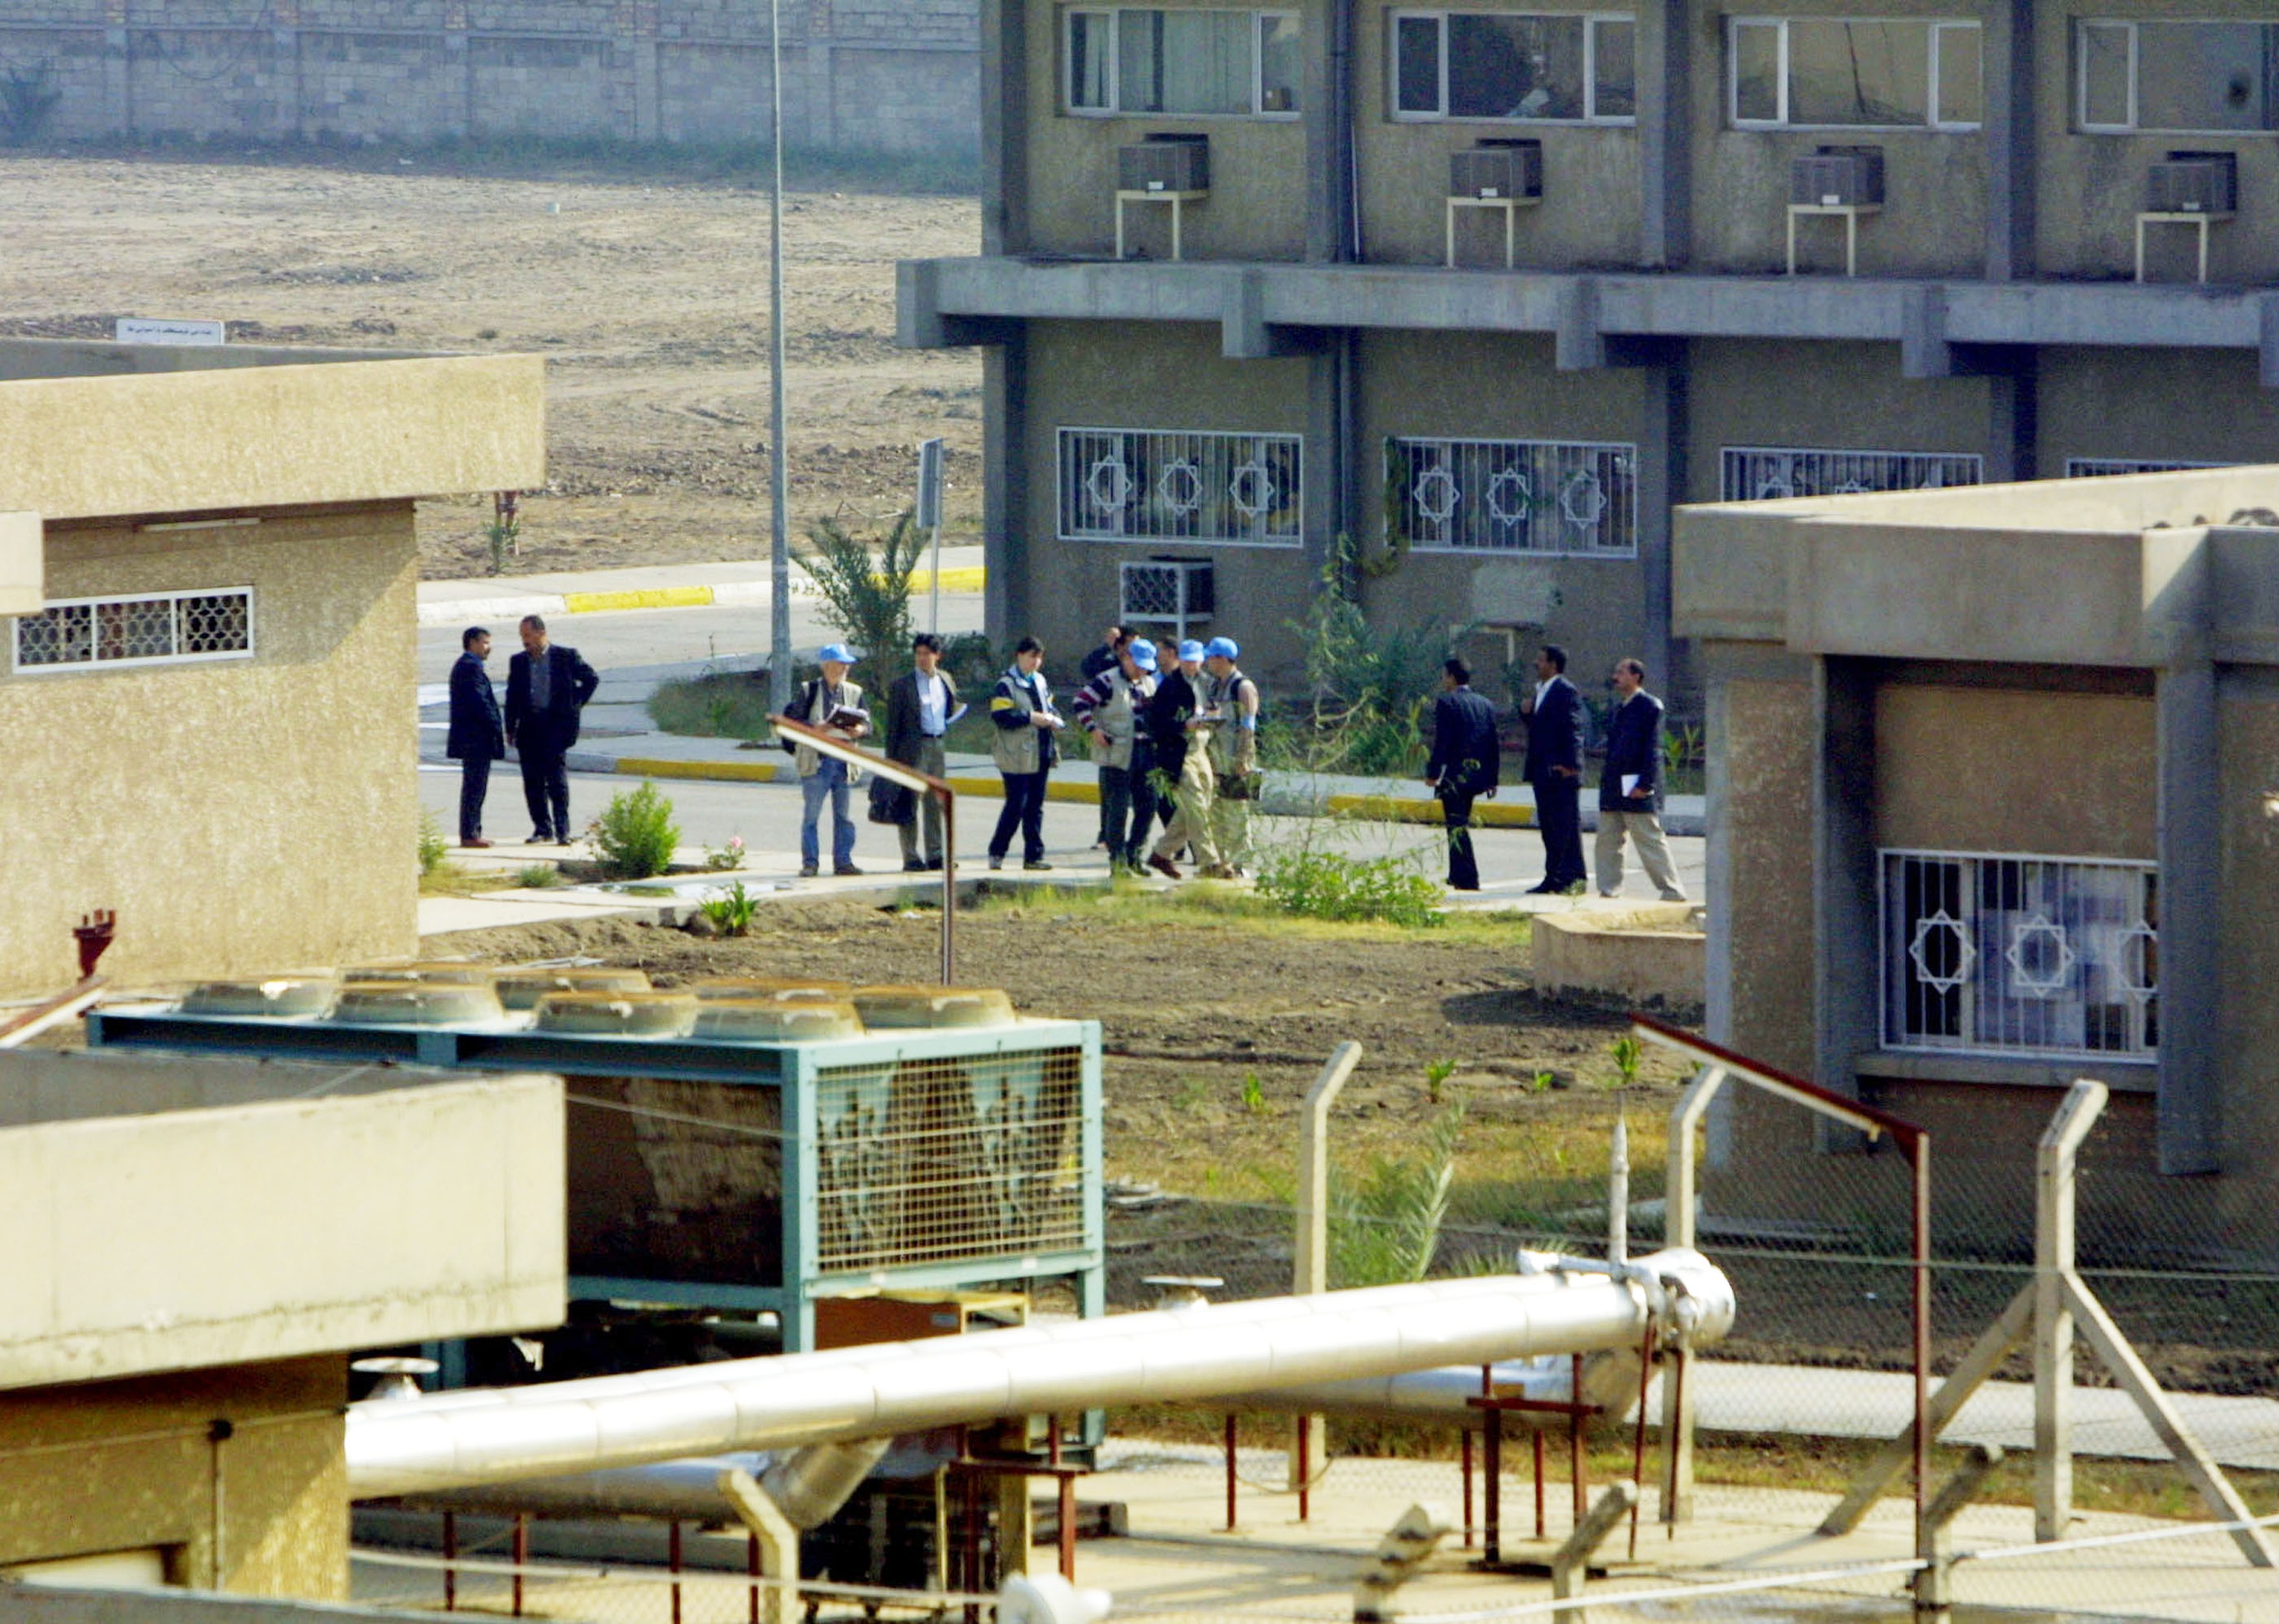  A U.N. inspection team conducts a search for weapons in December 2002 in Baghdad. 